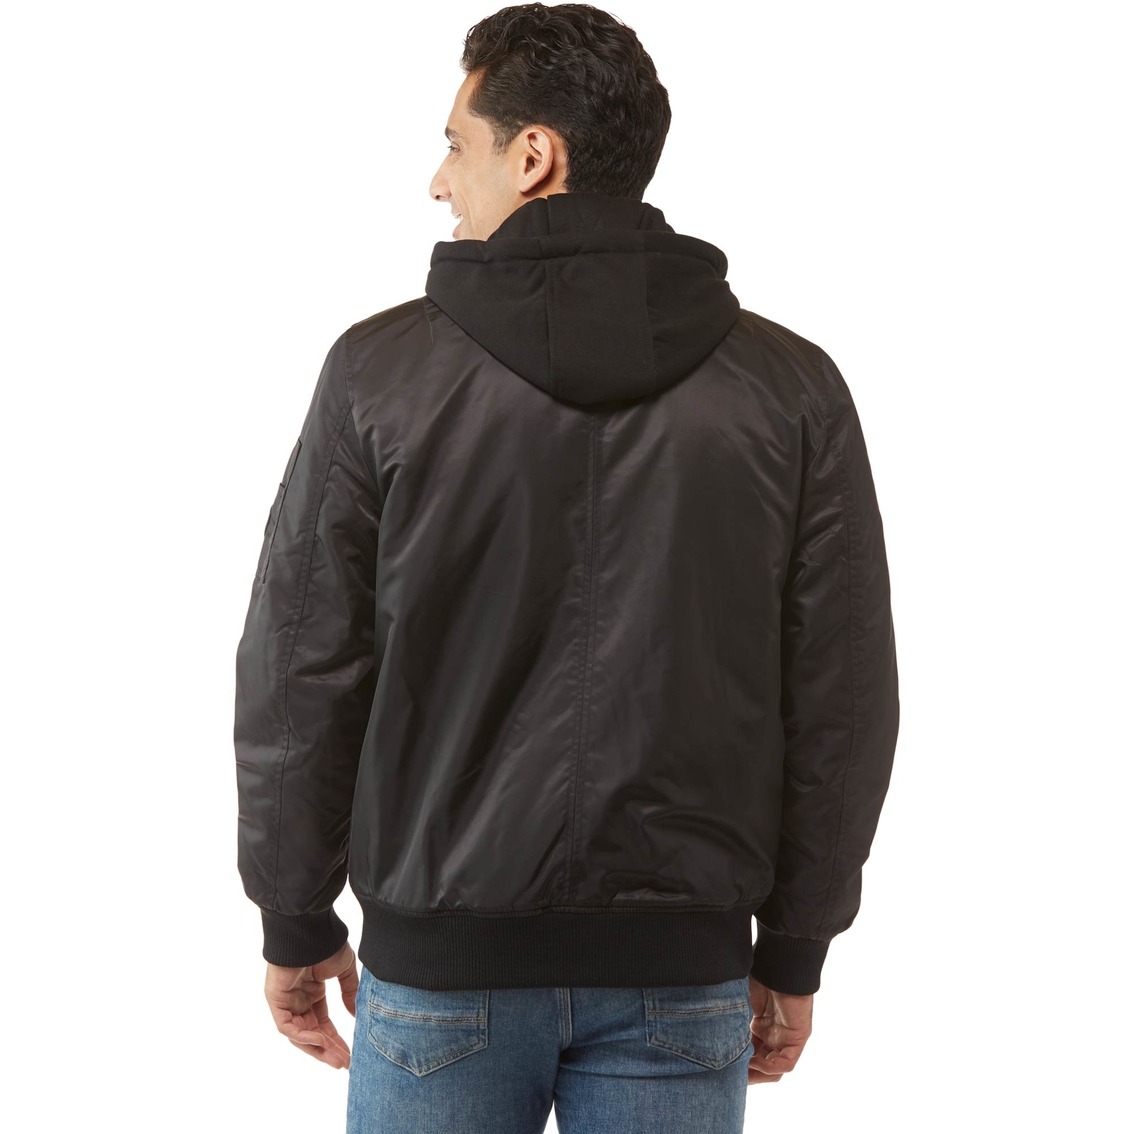 Guess Bomber Jacket With Hood | Jackets | Clothing & Accessories | Shop ...